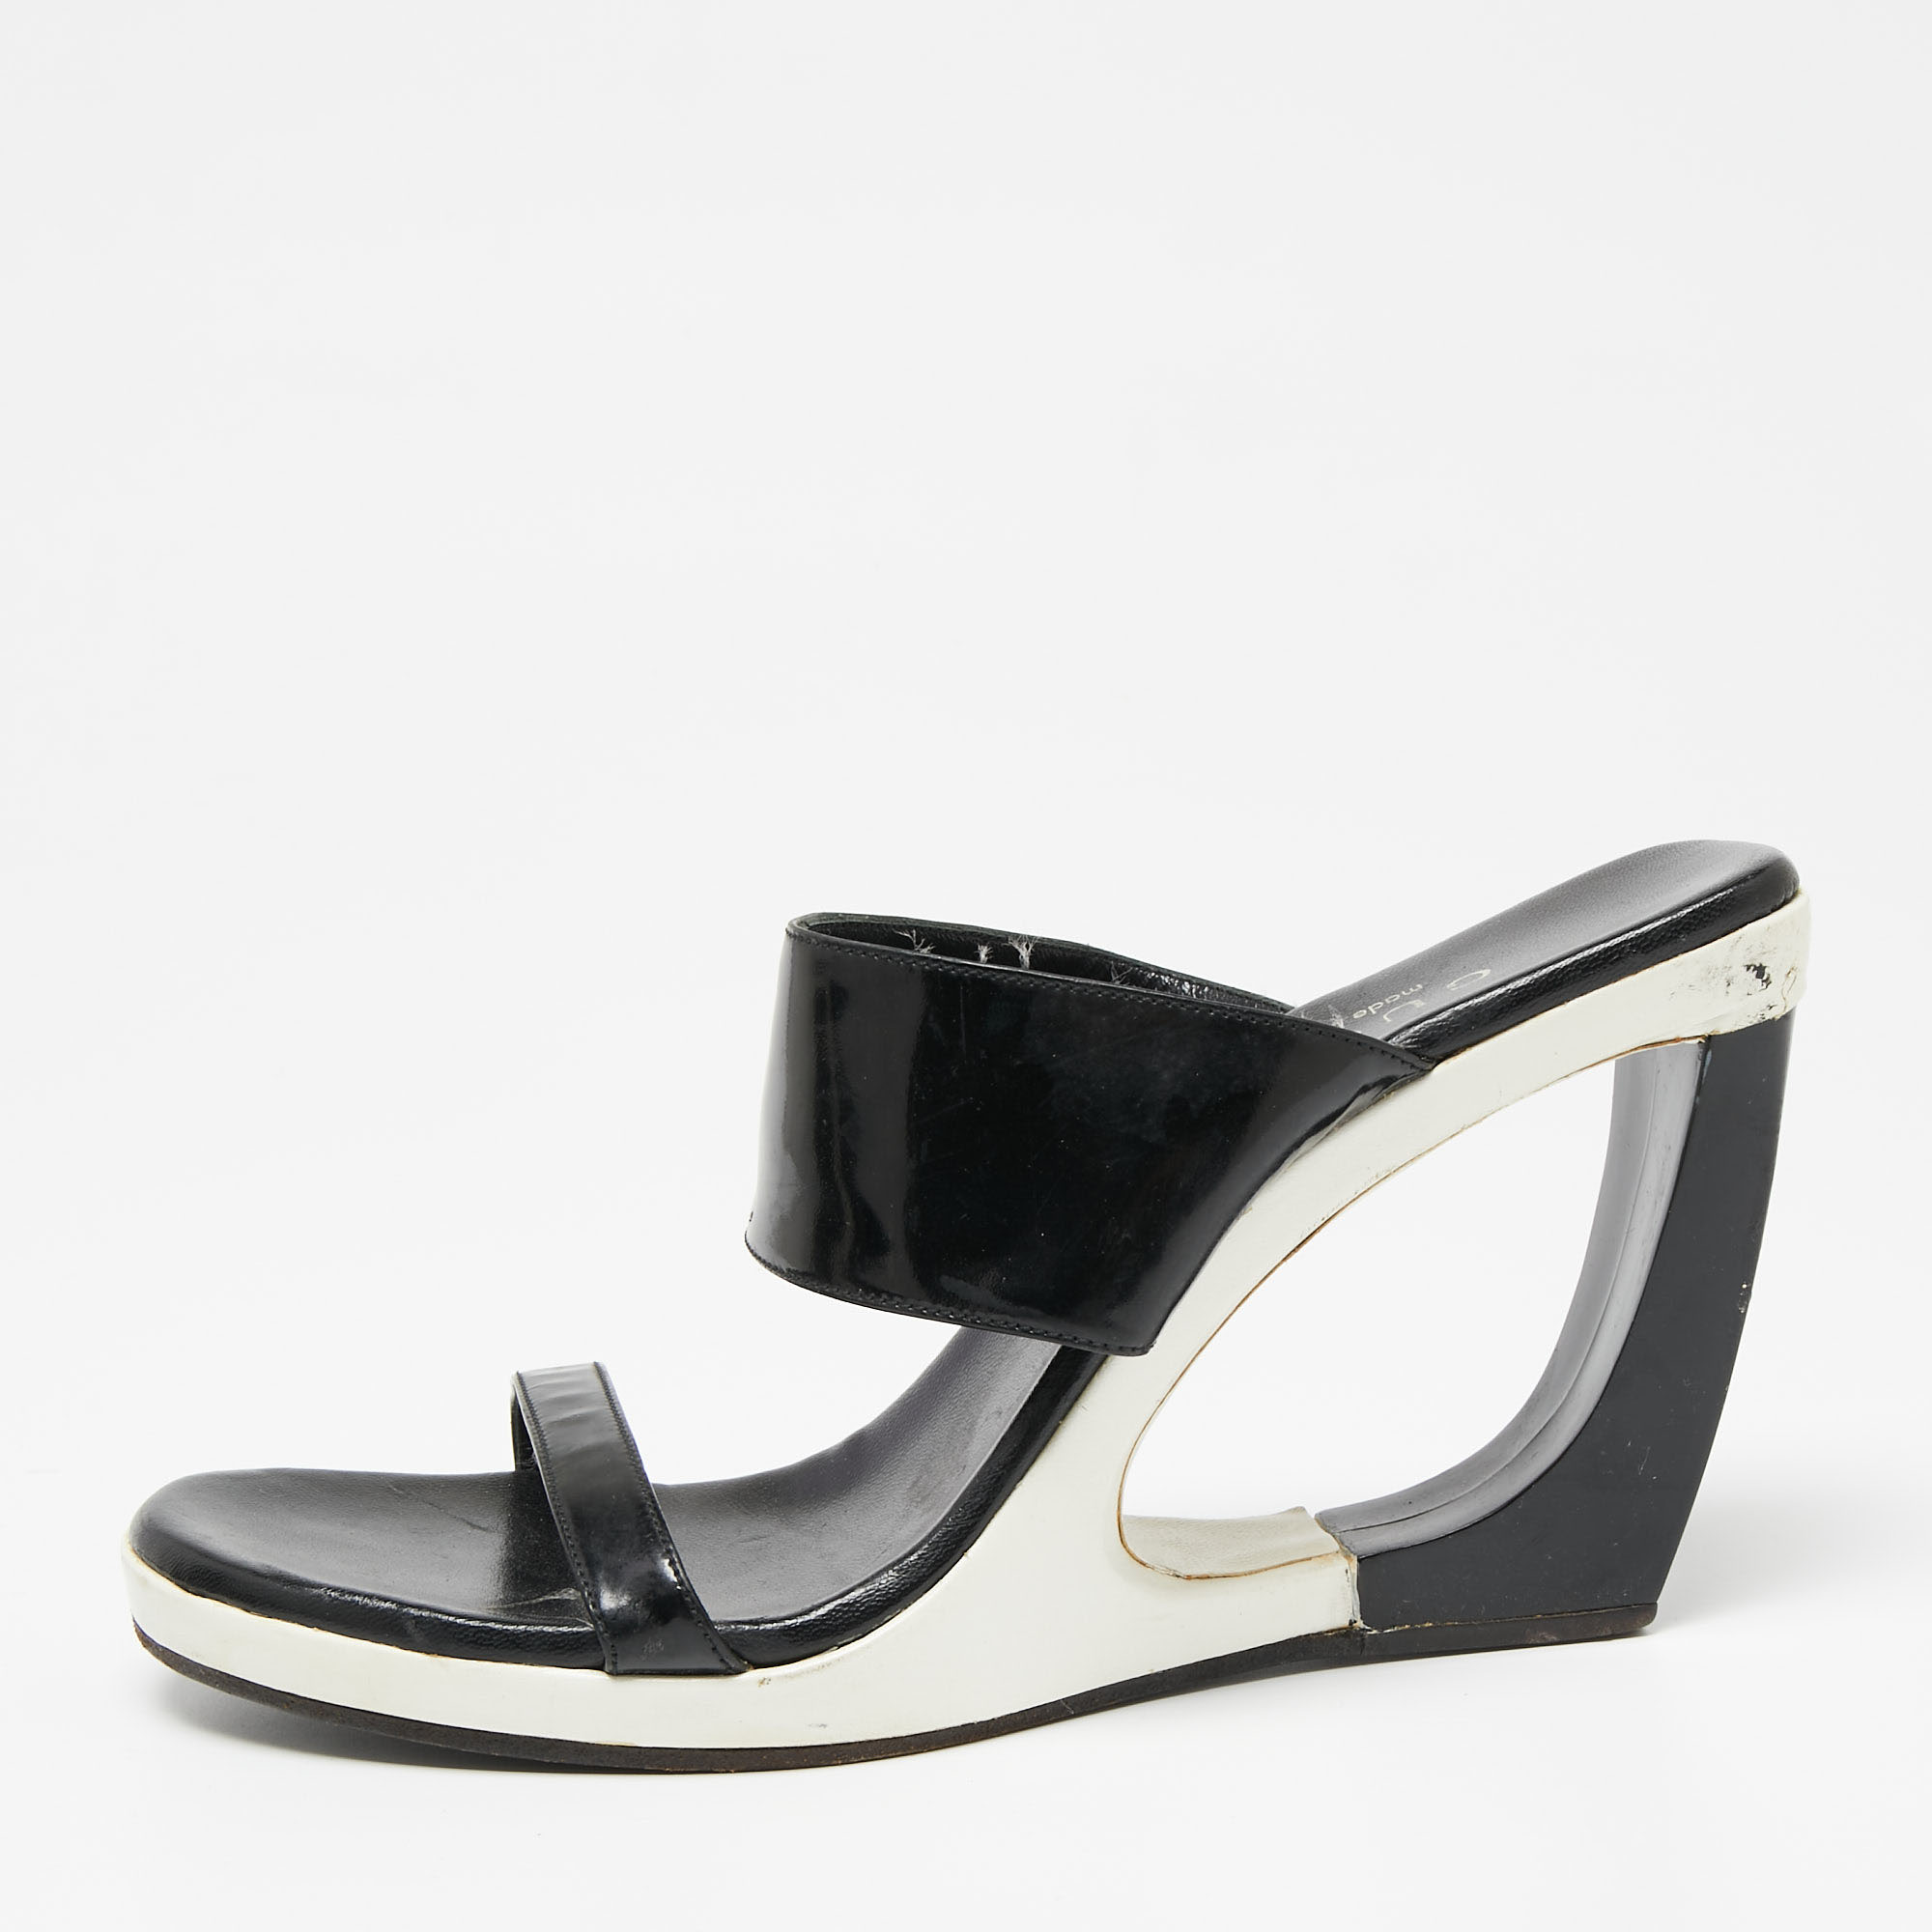 Gucci Black Patent Leather Cut-Out Wedge Slide Sandals Size 38